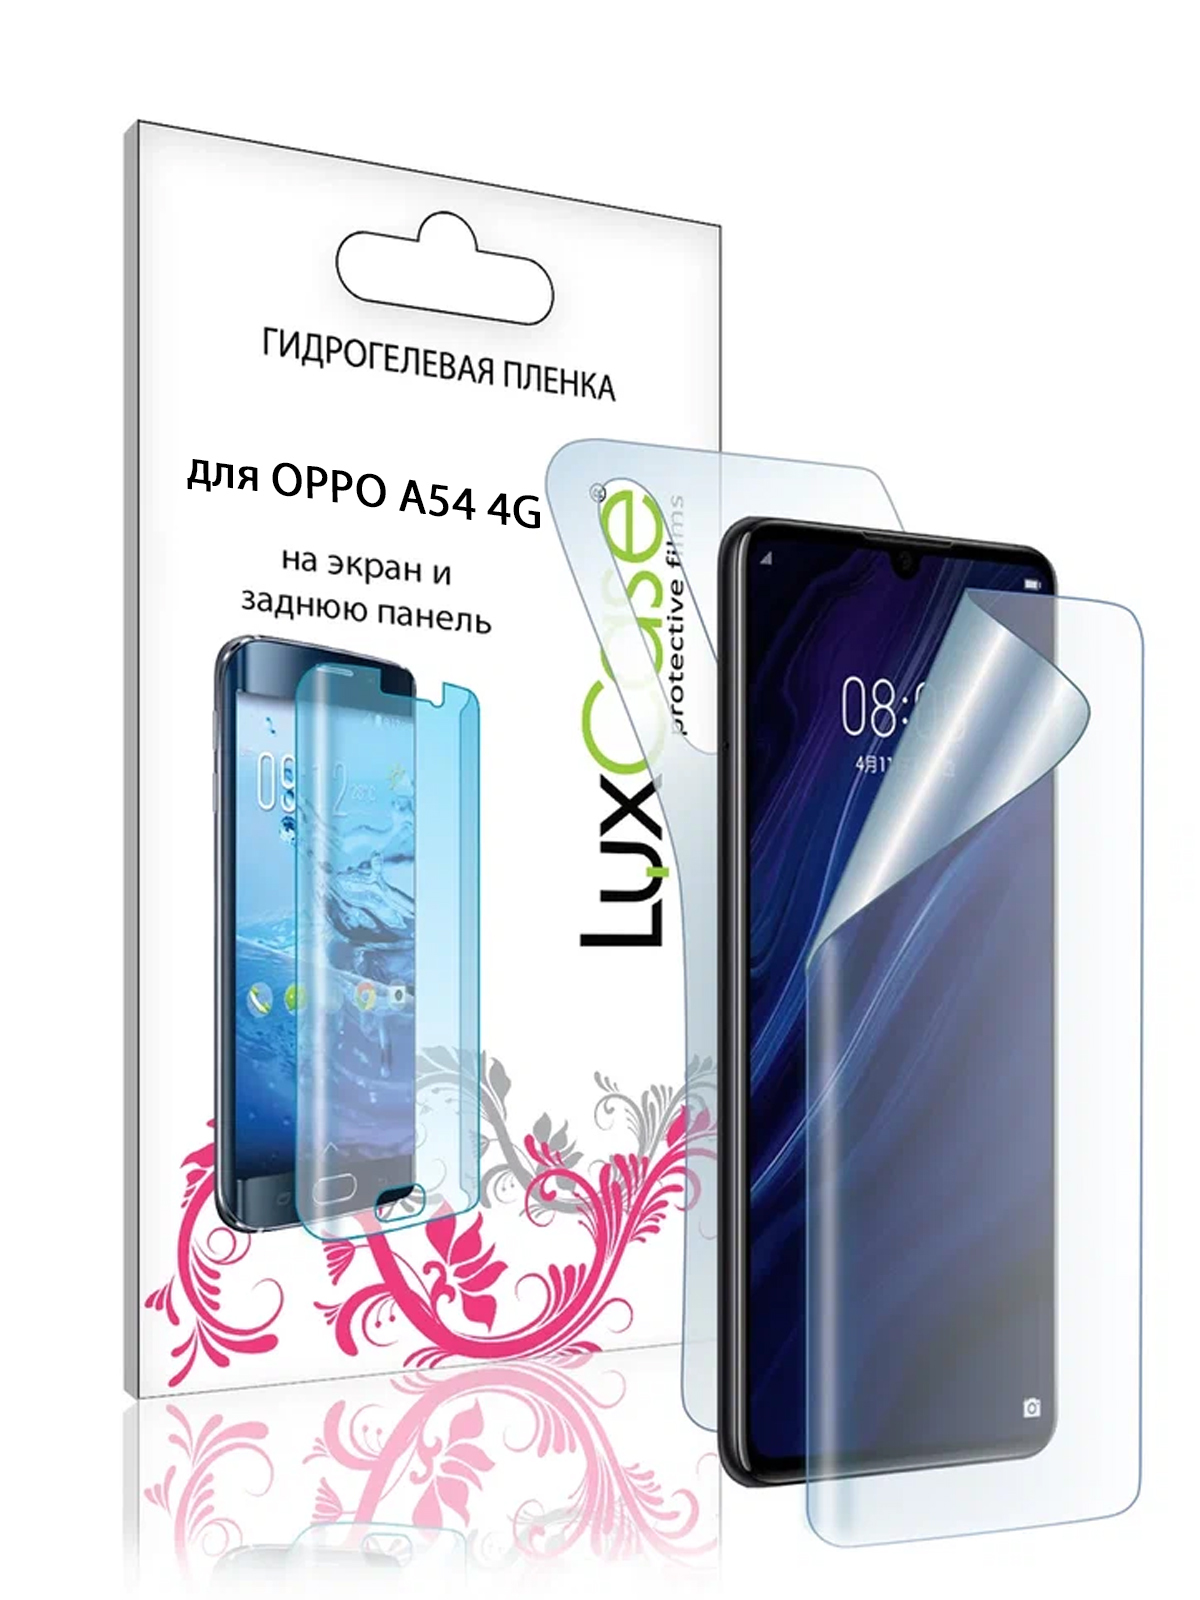 Пленка гидрогелевая LuxCase для Oppo A54 Front and Back Transparent 86397 гидрогелевая пленка luxcase для google pixel 5 0 14mm front and back transparent 86726